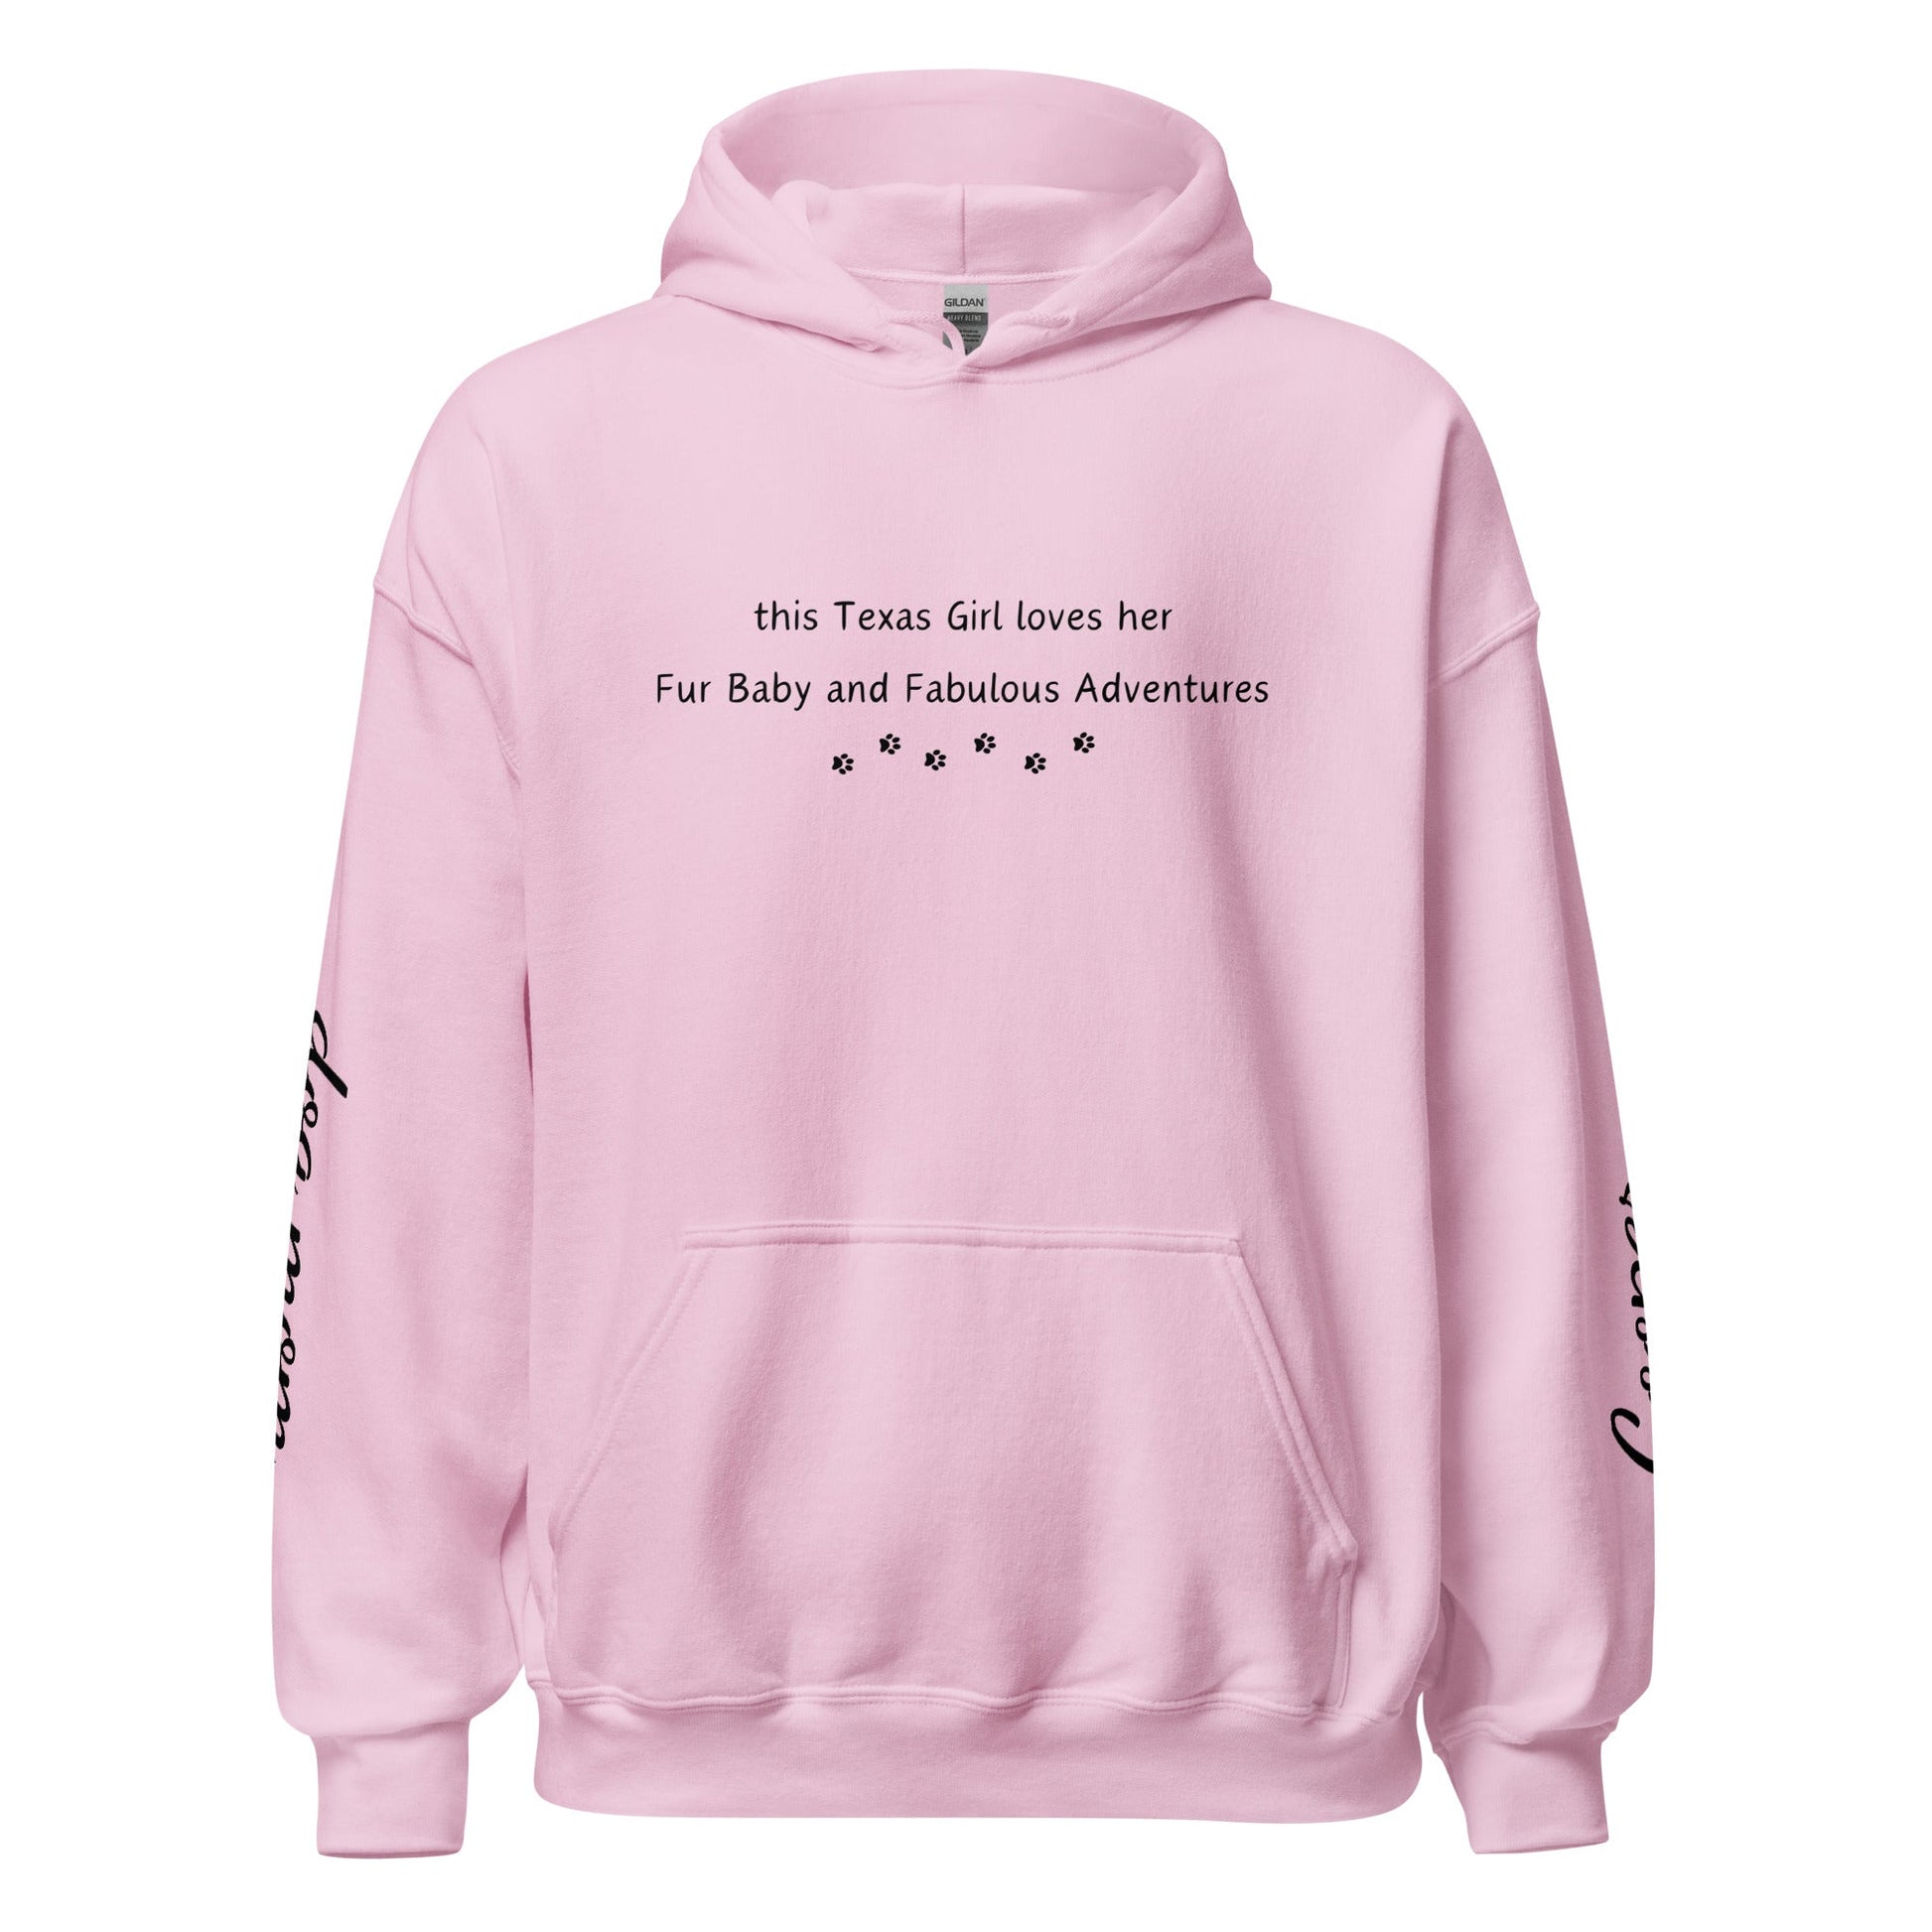 This Texas Girl Hoodie - Light Pink / S